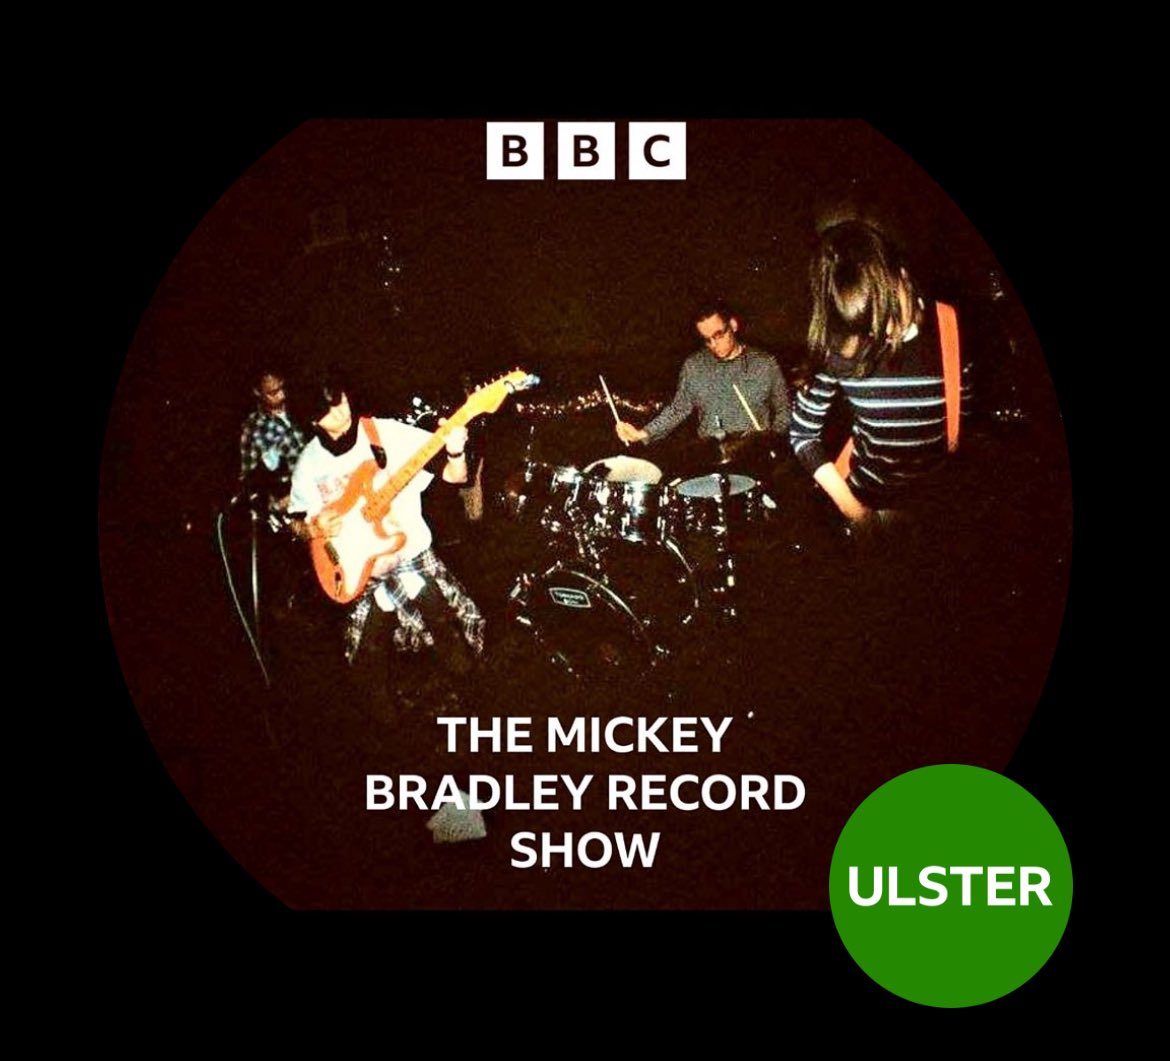 What a privilege to be played by @MickeyUndertone on @bbcradioulster tonight! Thanks so much for the kind words.